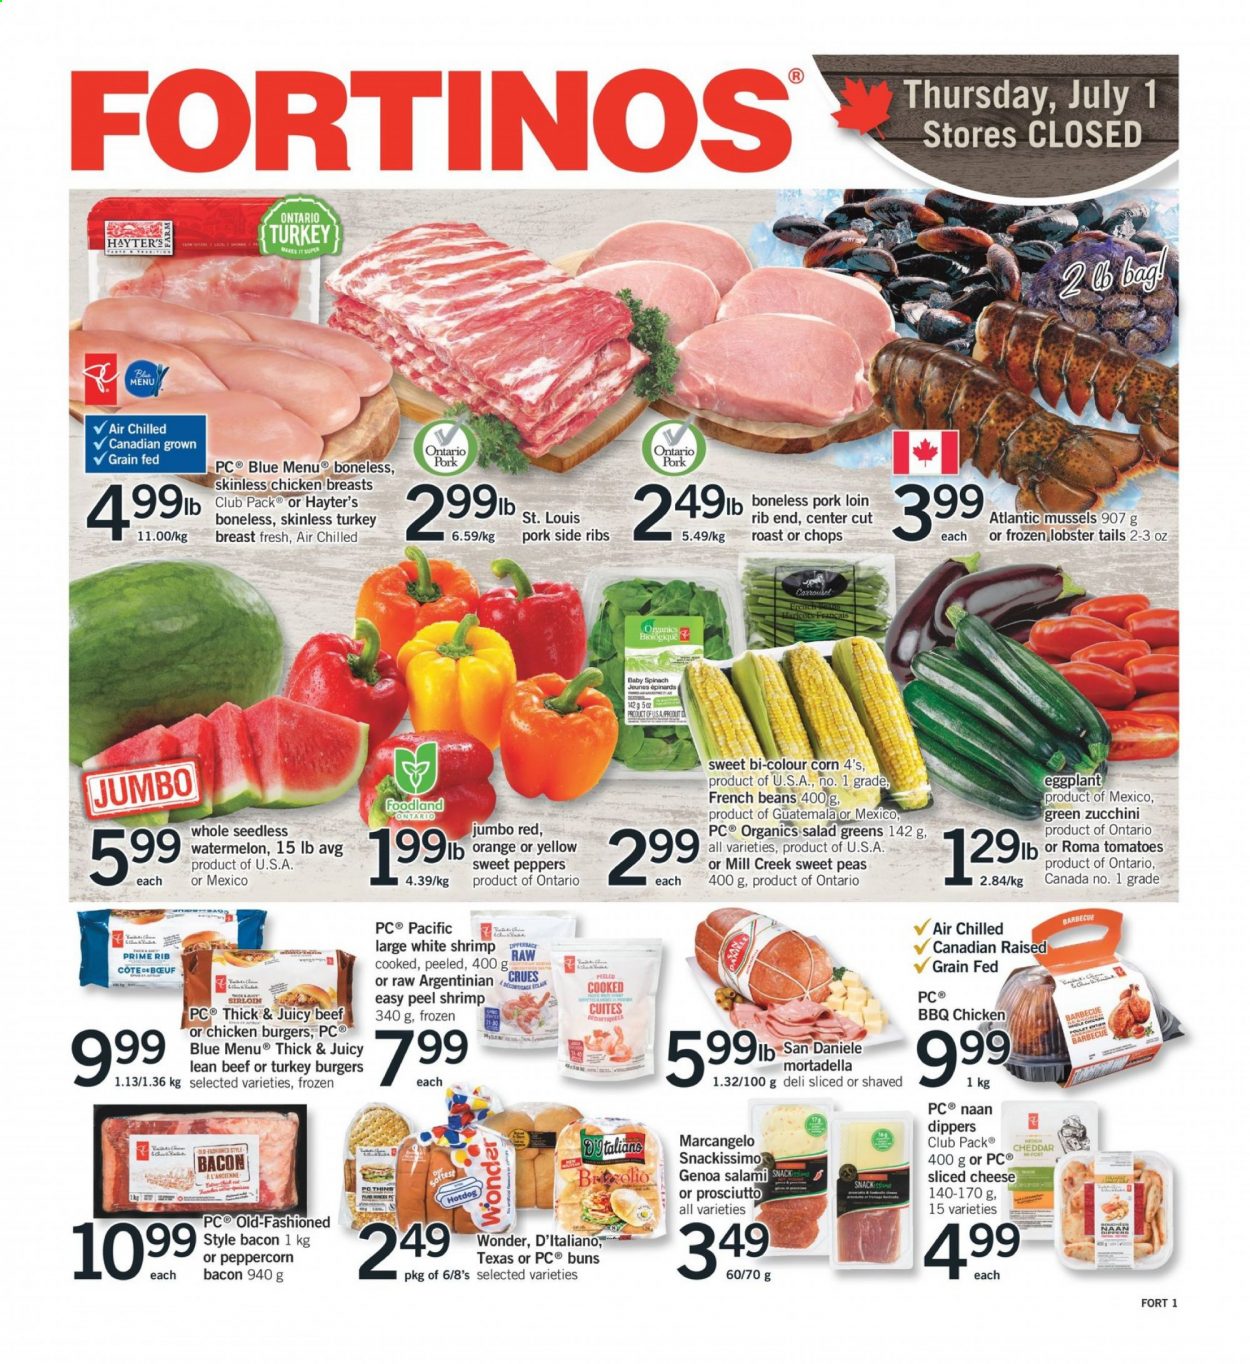 thumbnail - Fortinos Flyer - June 24, 2021 - June 30, 2021 - Sales products - hot dog rolls, buns, beans, corn, french beans, spinach, sweet peppers, tomatoes, zucchini, peas, salad, salad greens, peppers, eggplant, watermelon, lobster, mussels, lobster tail, shrimps, hot dog, hamburger, bacon, mortadella, salami, sliced cheese, cheddar, cheese, snack, Thins, turkey breast, chicken breasts, turkey, beef meat, turkey burger, pork loin, pork meat, bag, pot, AVG. Page 1.